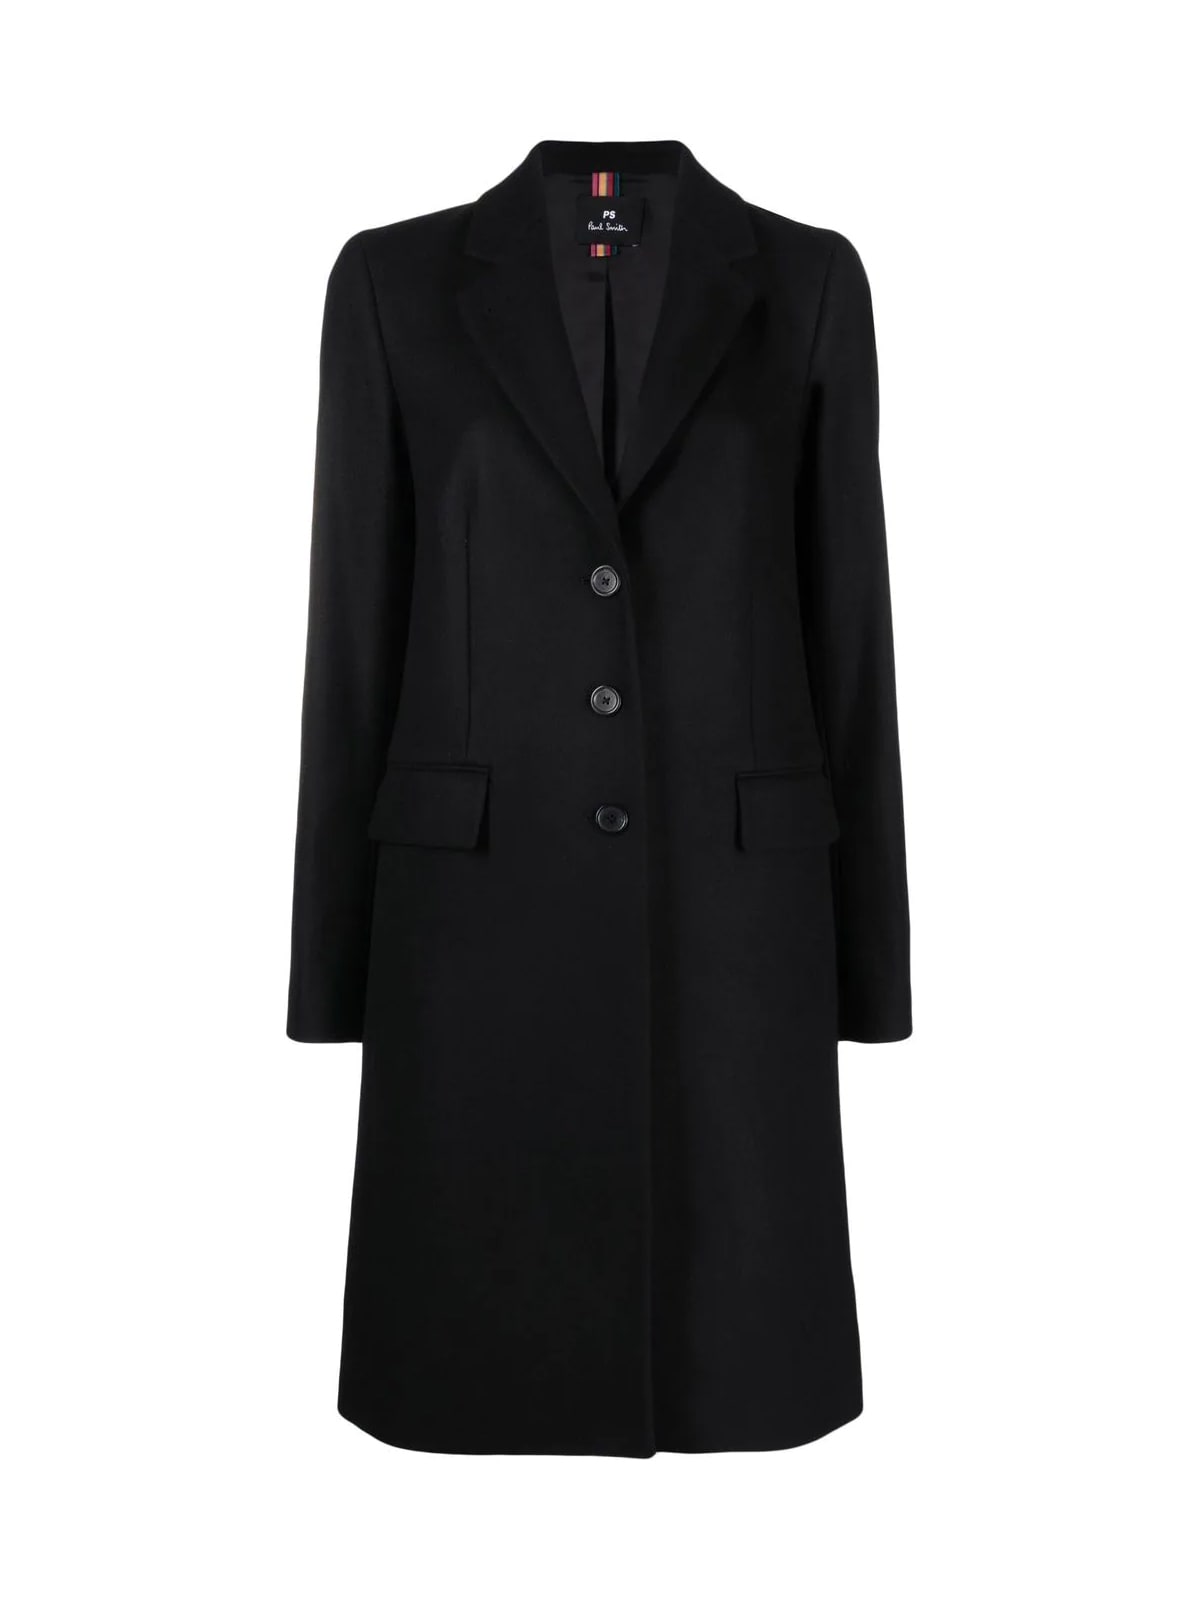 PS by Paul Smith Womens Single Breasted Coat